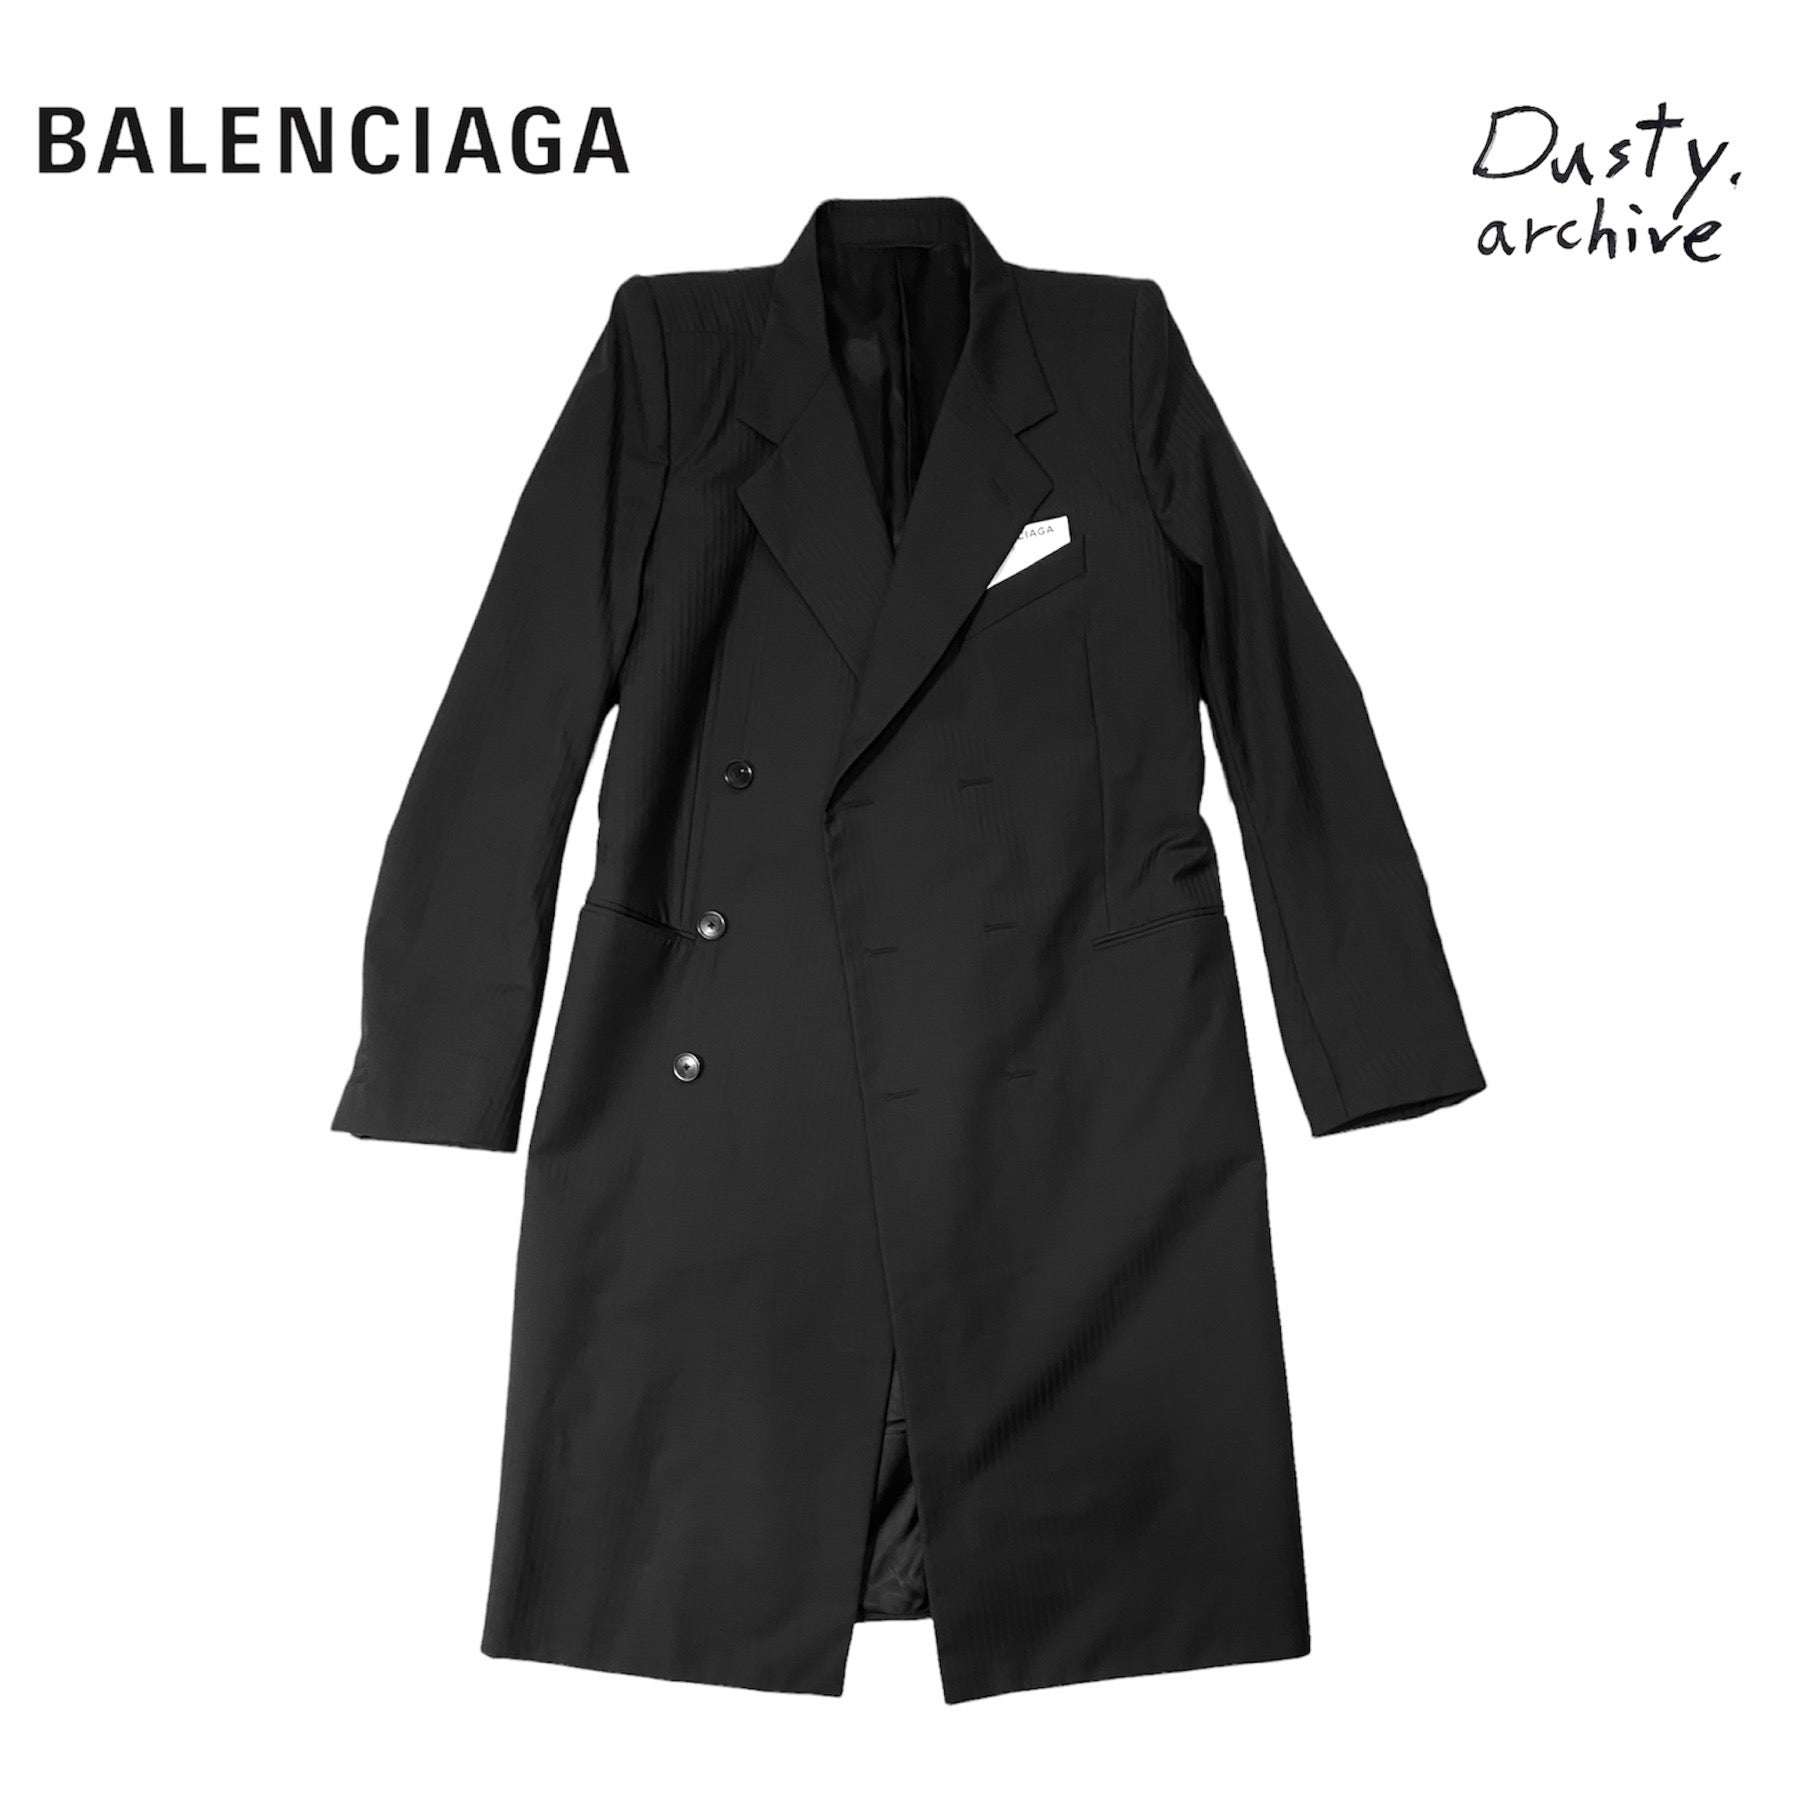 Balenciaga ss17 Double breasted coat with Shrunk shoulder padding ...